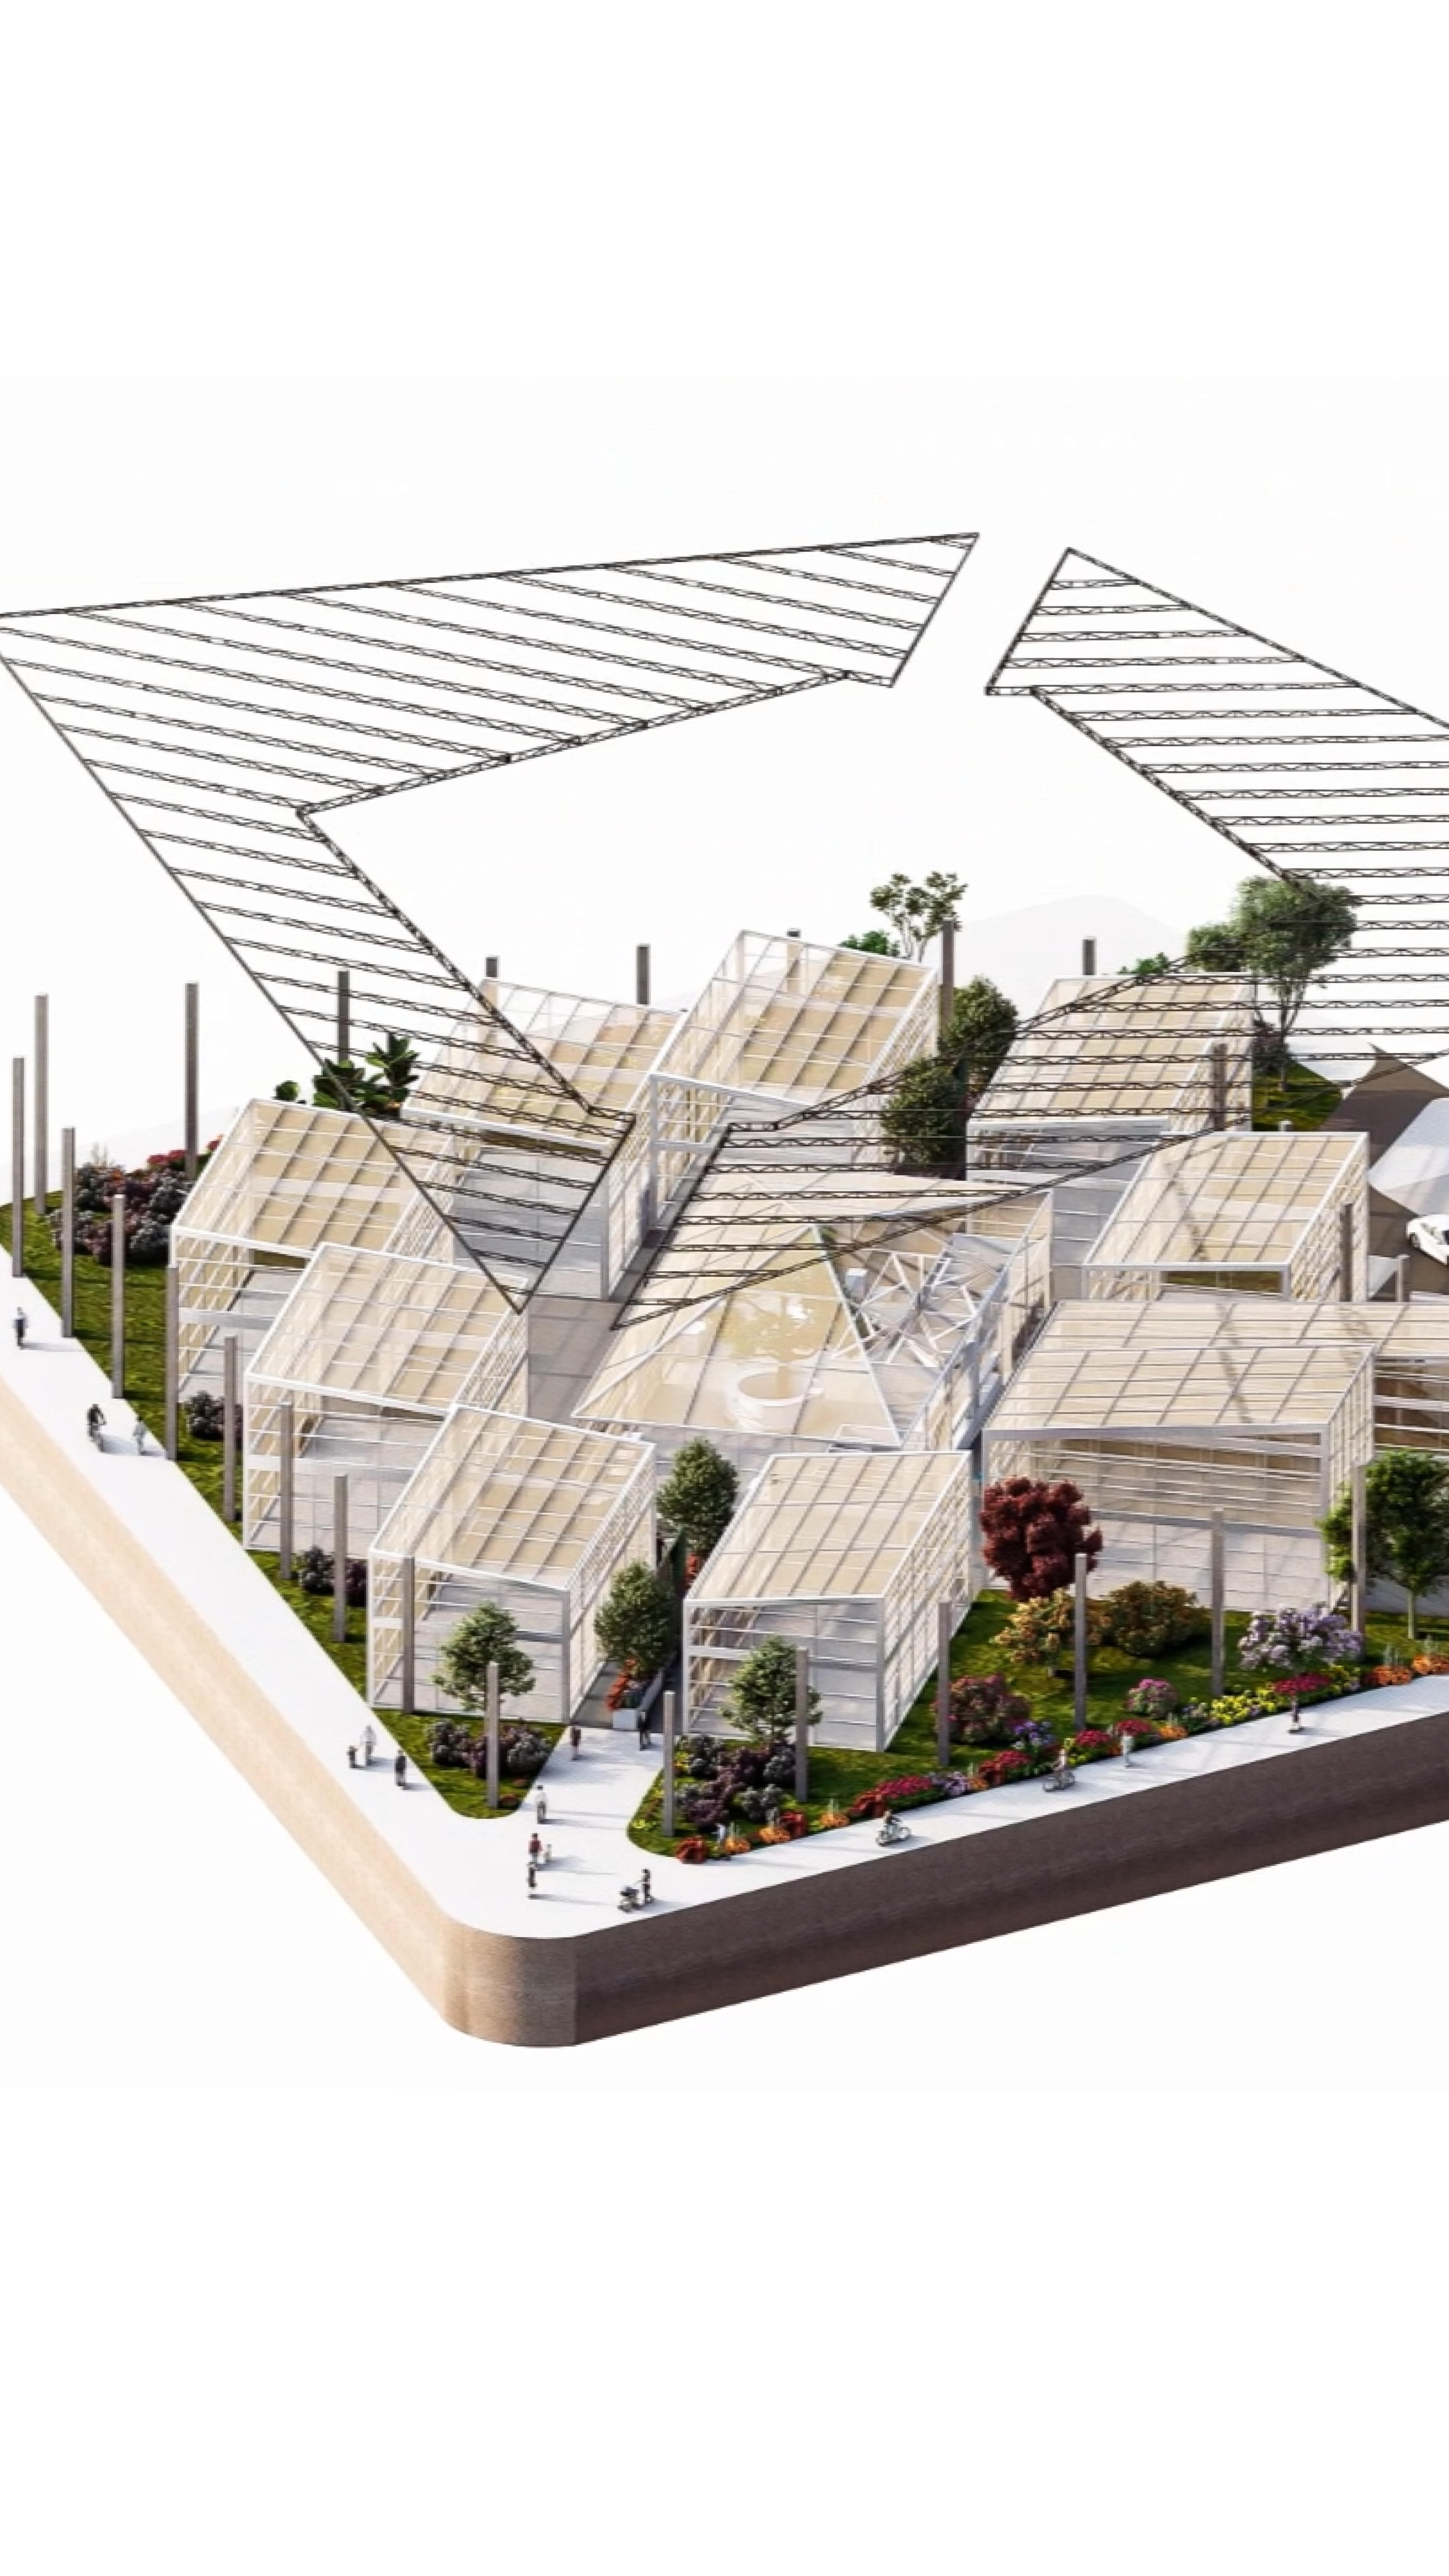 A modern urban greenhouse complex with a unique geometric canopy, surrounded by pedestrian pathways and greenery.